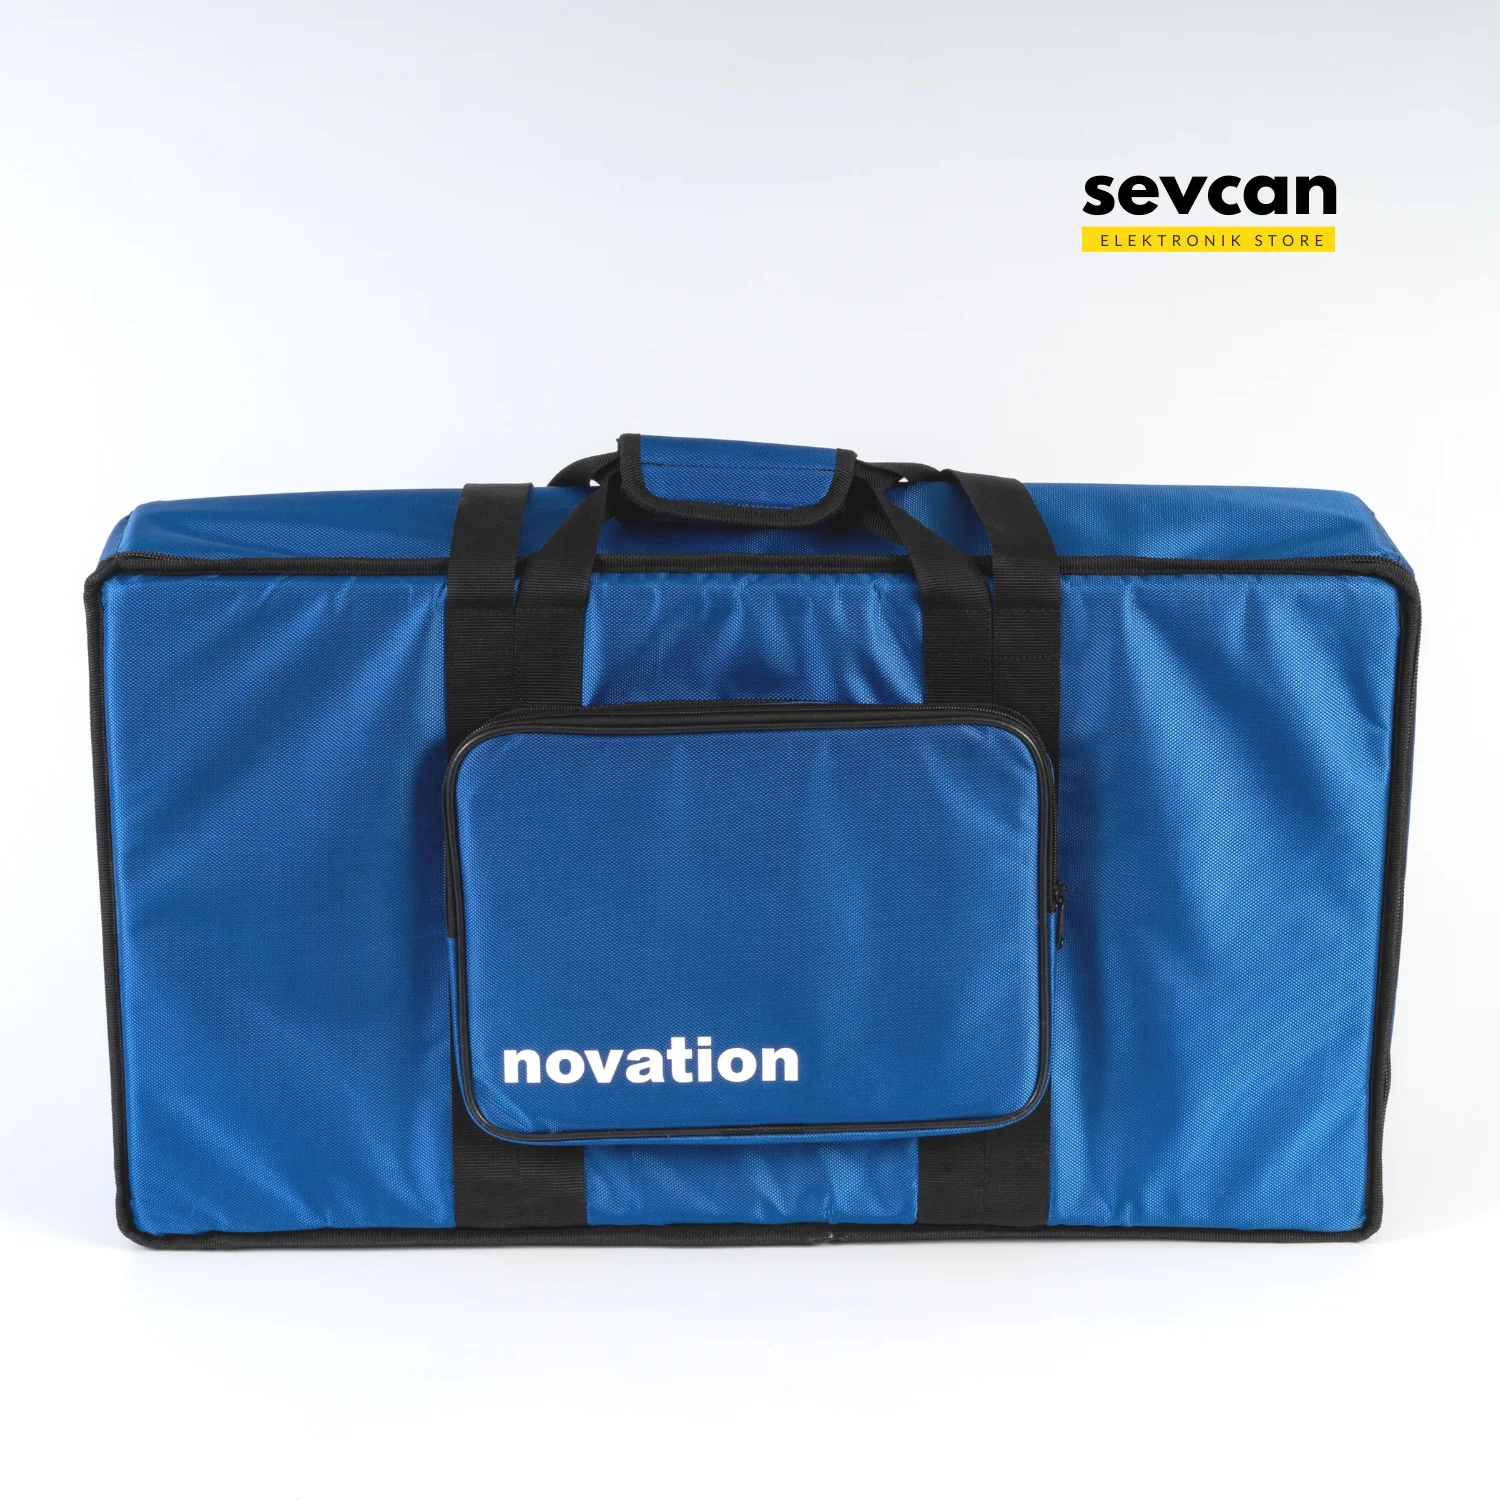 Professional Soft Case Carrying Protection Safety Instrument DJ Equipment Covering Bag Novation Compatible MC7